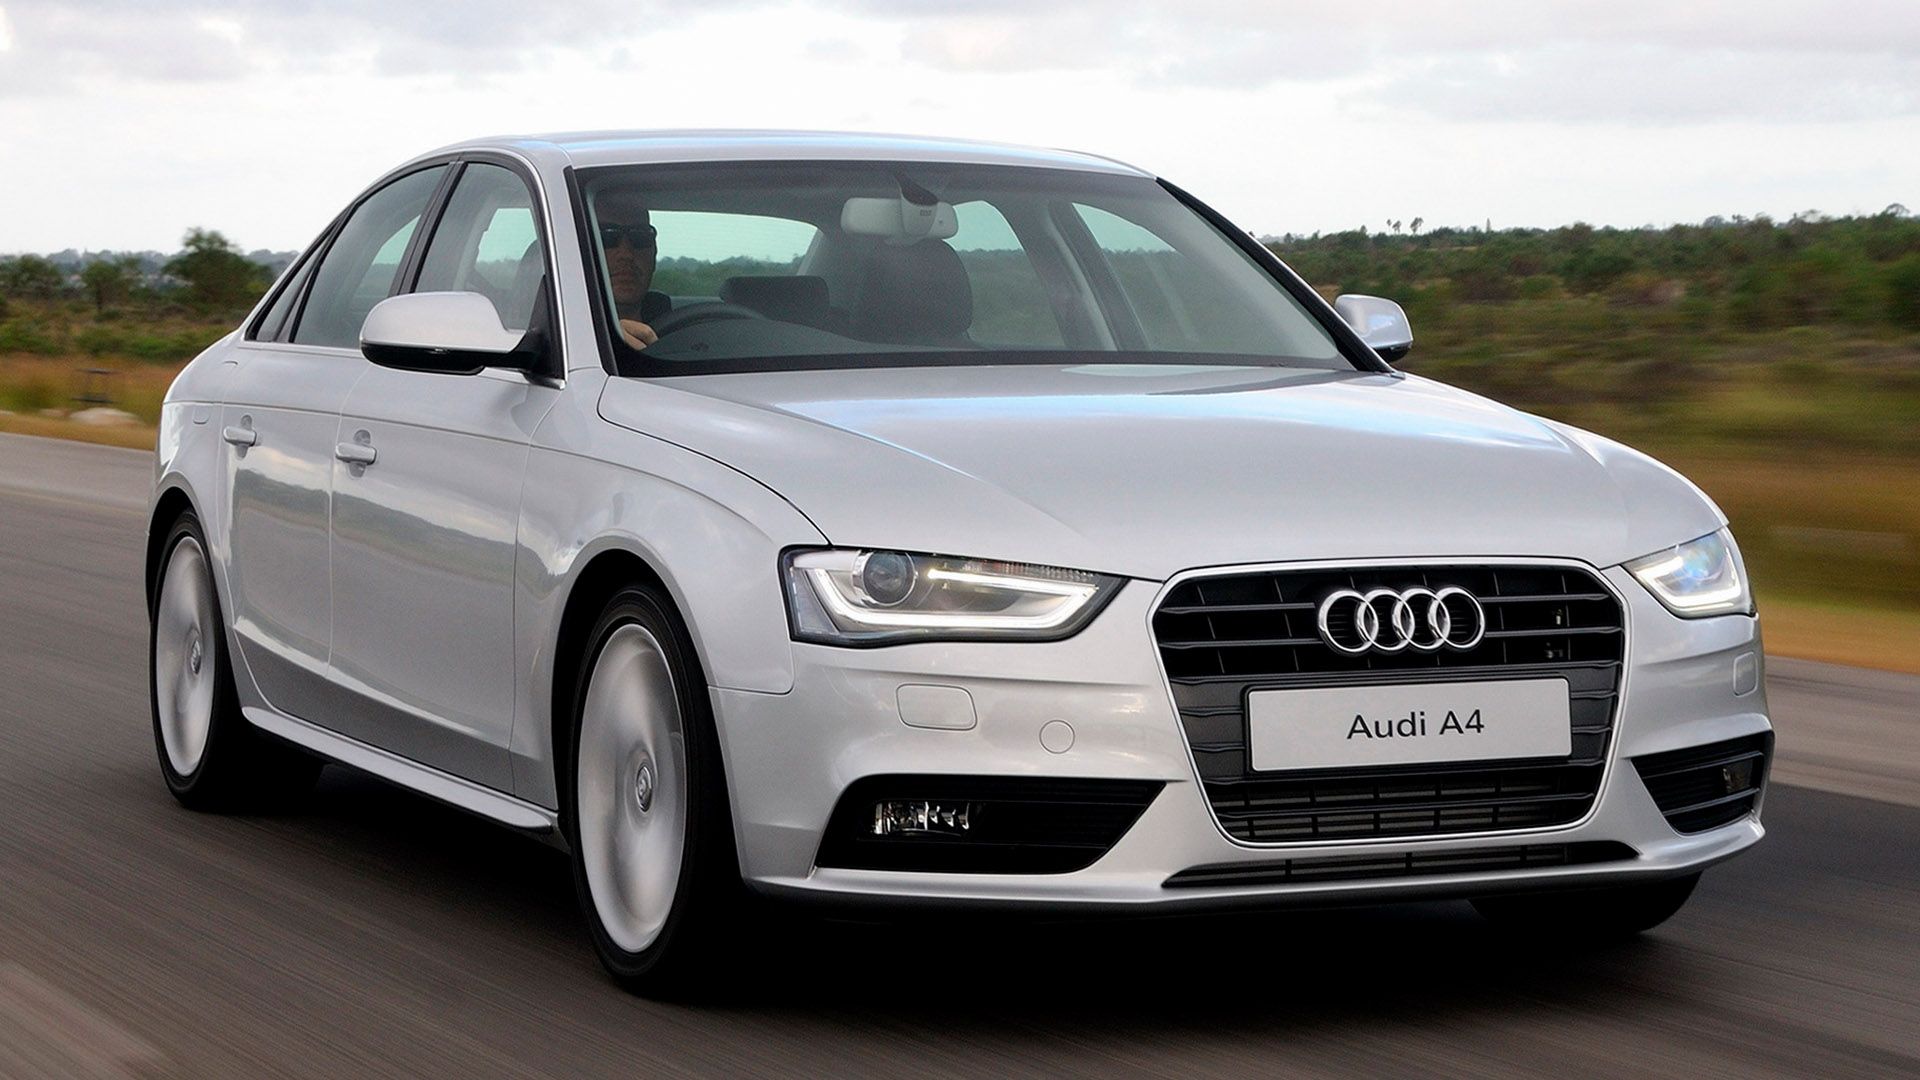 Silver Audi A4 saloon driving on a road